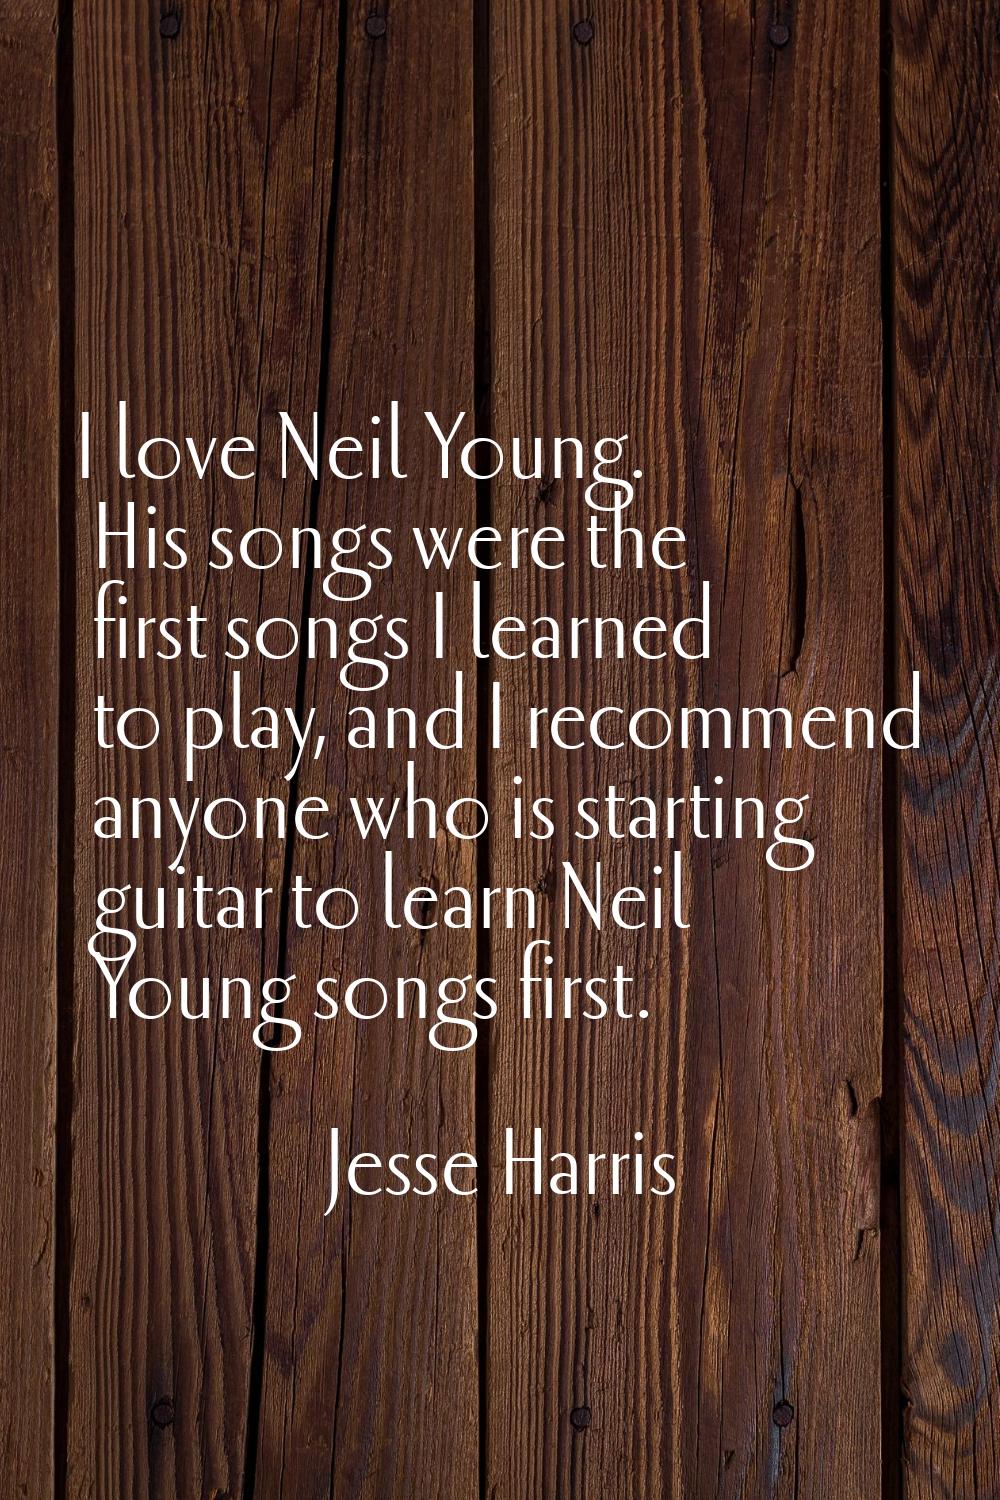 I love Neil Young. His songs were the first songs I learned to play, and I recommend anyone who is 